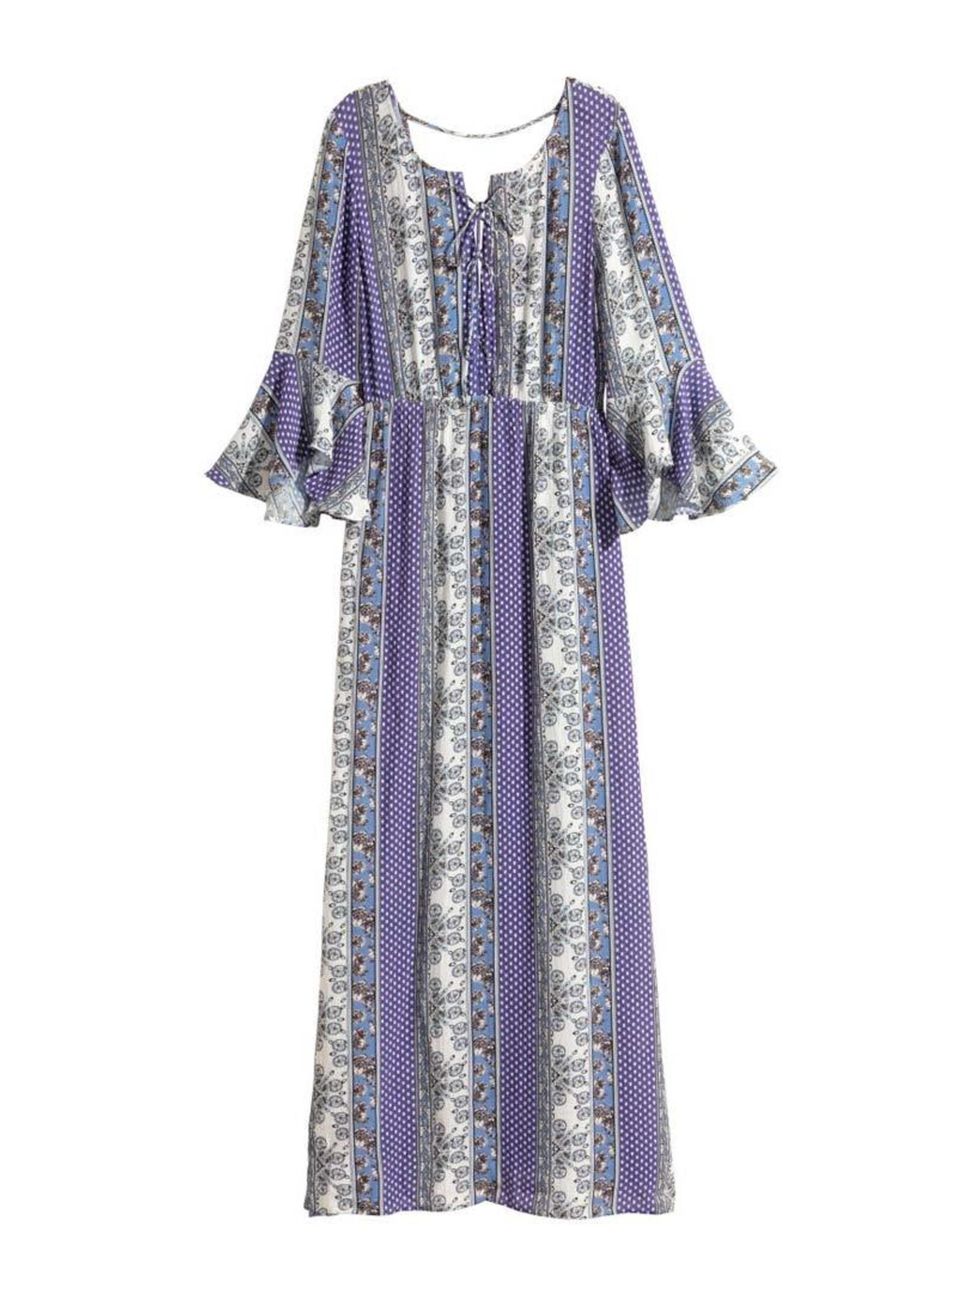 <p>Sunshine, don't be such a tease.</p>

<p><a href="http://www.hm.com/gb/product/11910?article=11910-B" target="_blank">H&M</a> dress, £24.99</p>